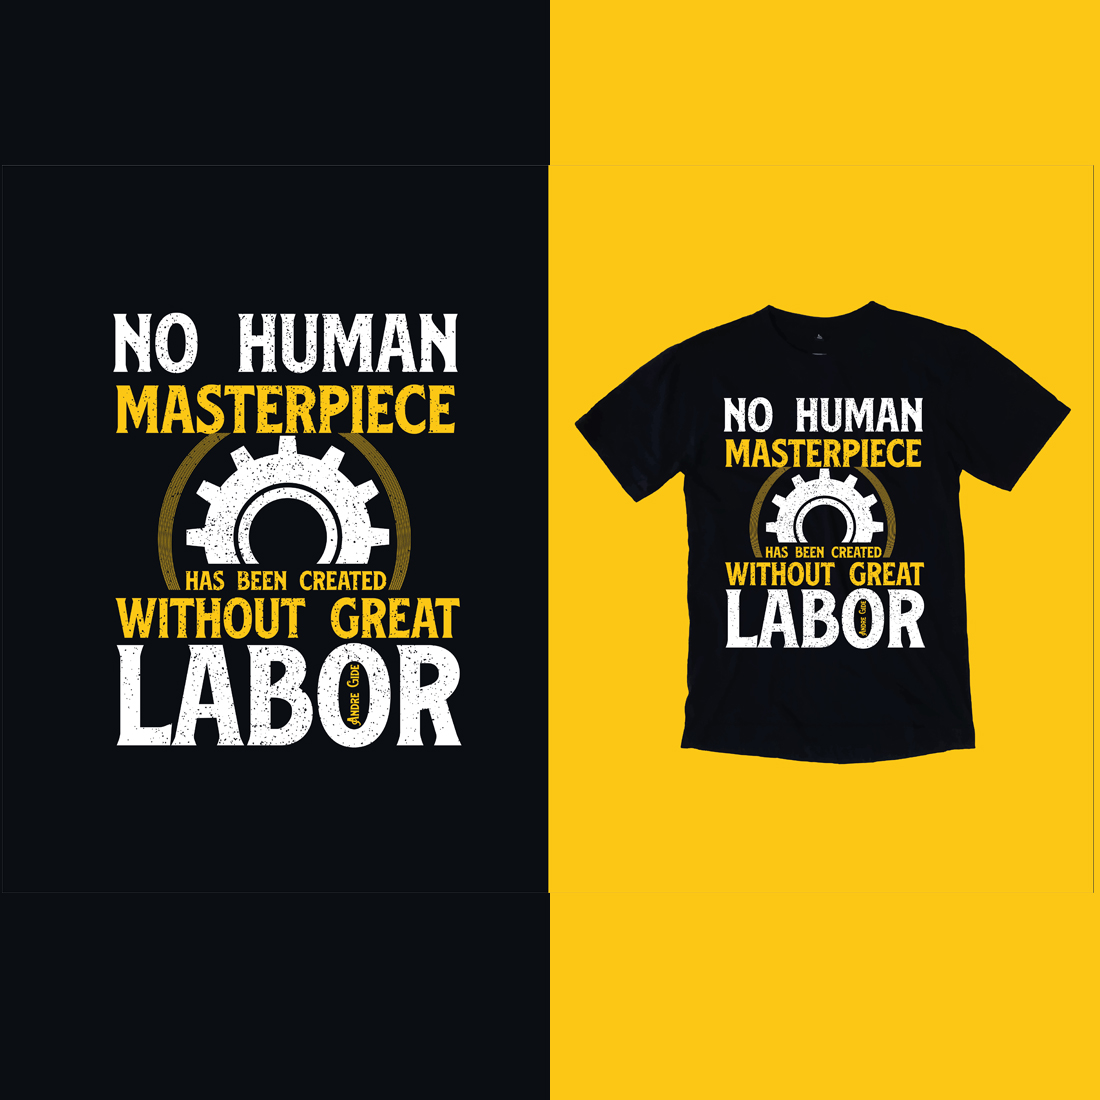 Two t - shirts that say no human masterpiece without great labor.